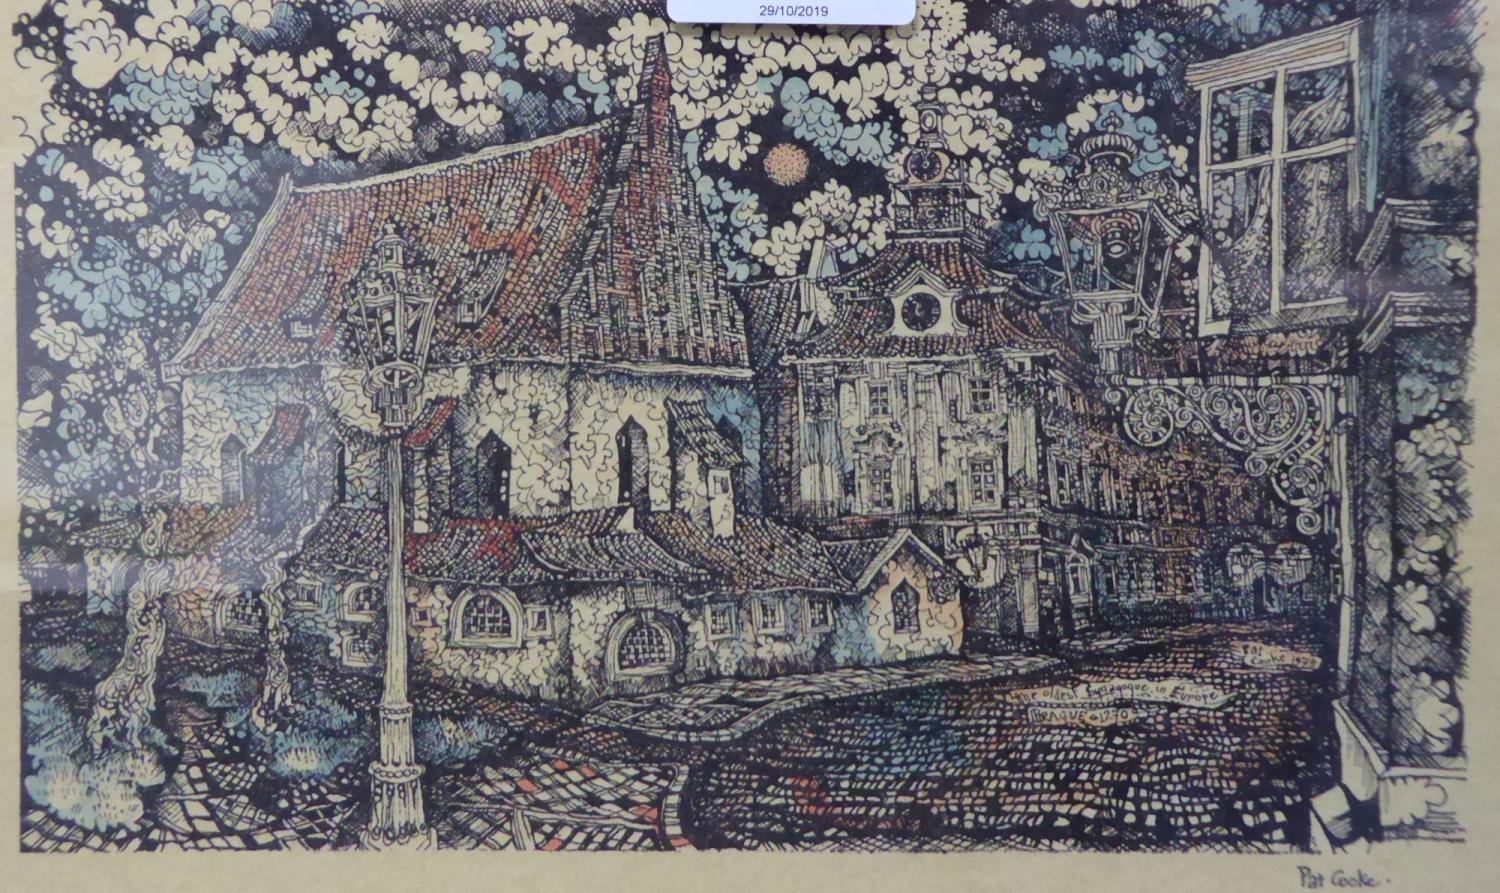 PAT COOKE COLOUR PRINT 'The Oldest Synagogue in Europe, Prague, 1270' 5 1/4" x 9" (13.3cm x 22.9cm)